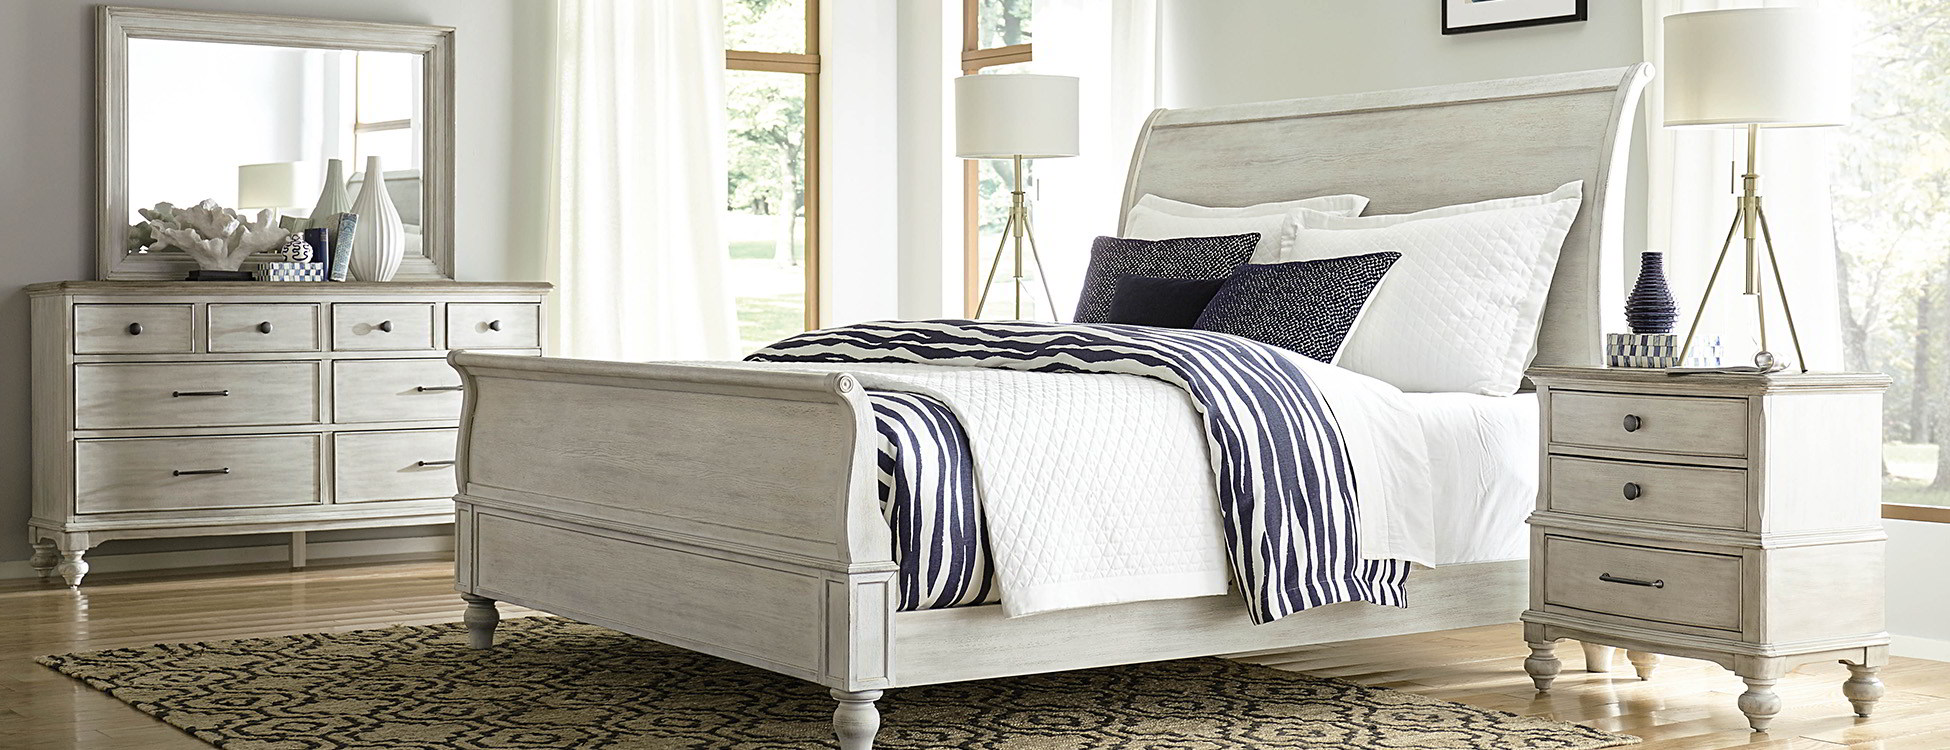 Home Bedroom Furniture Store In Long Island One Ten Home